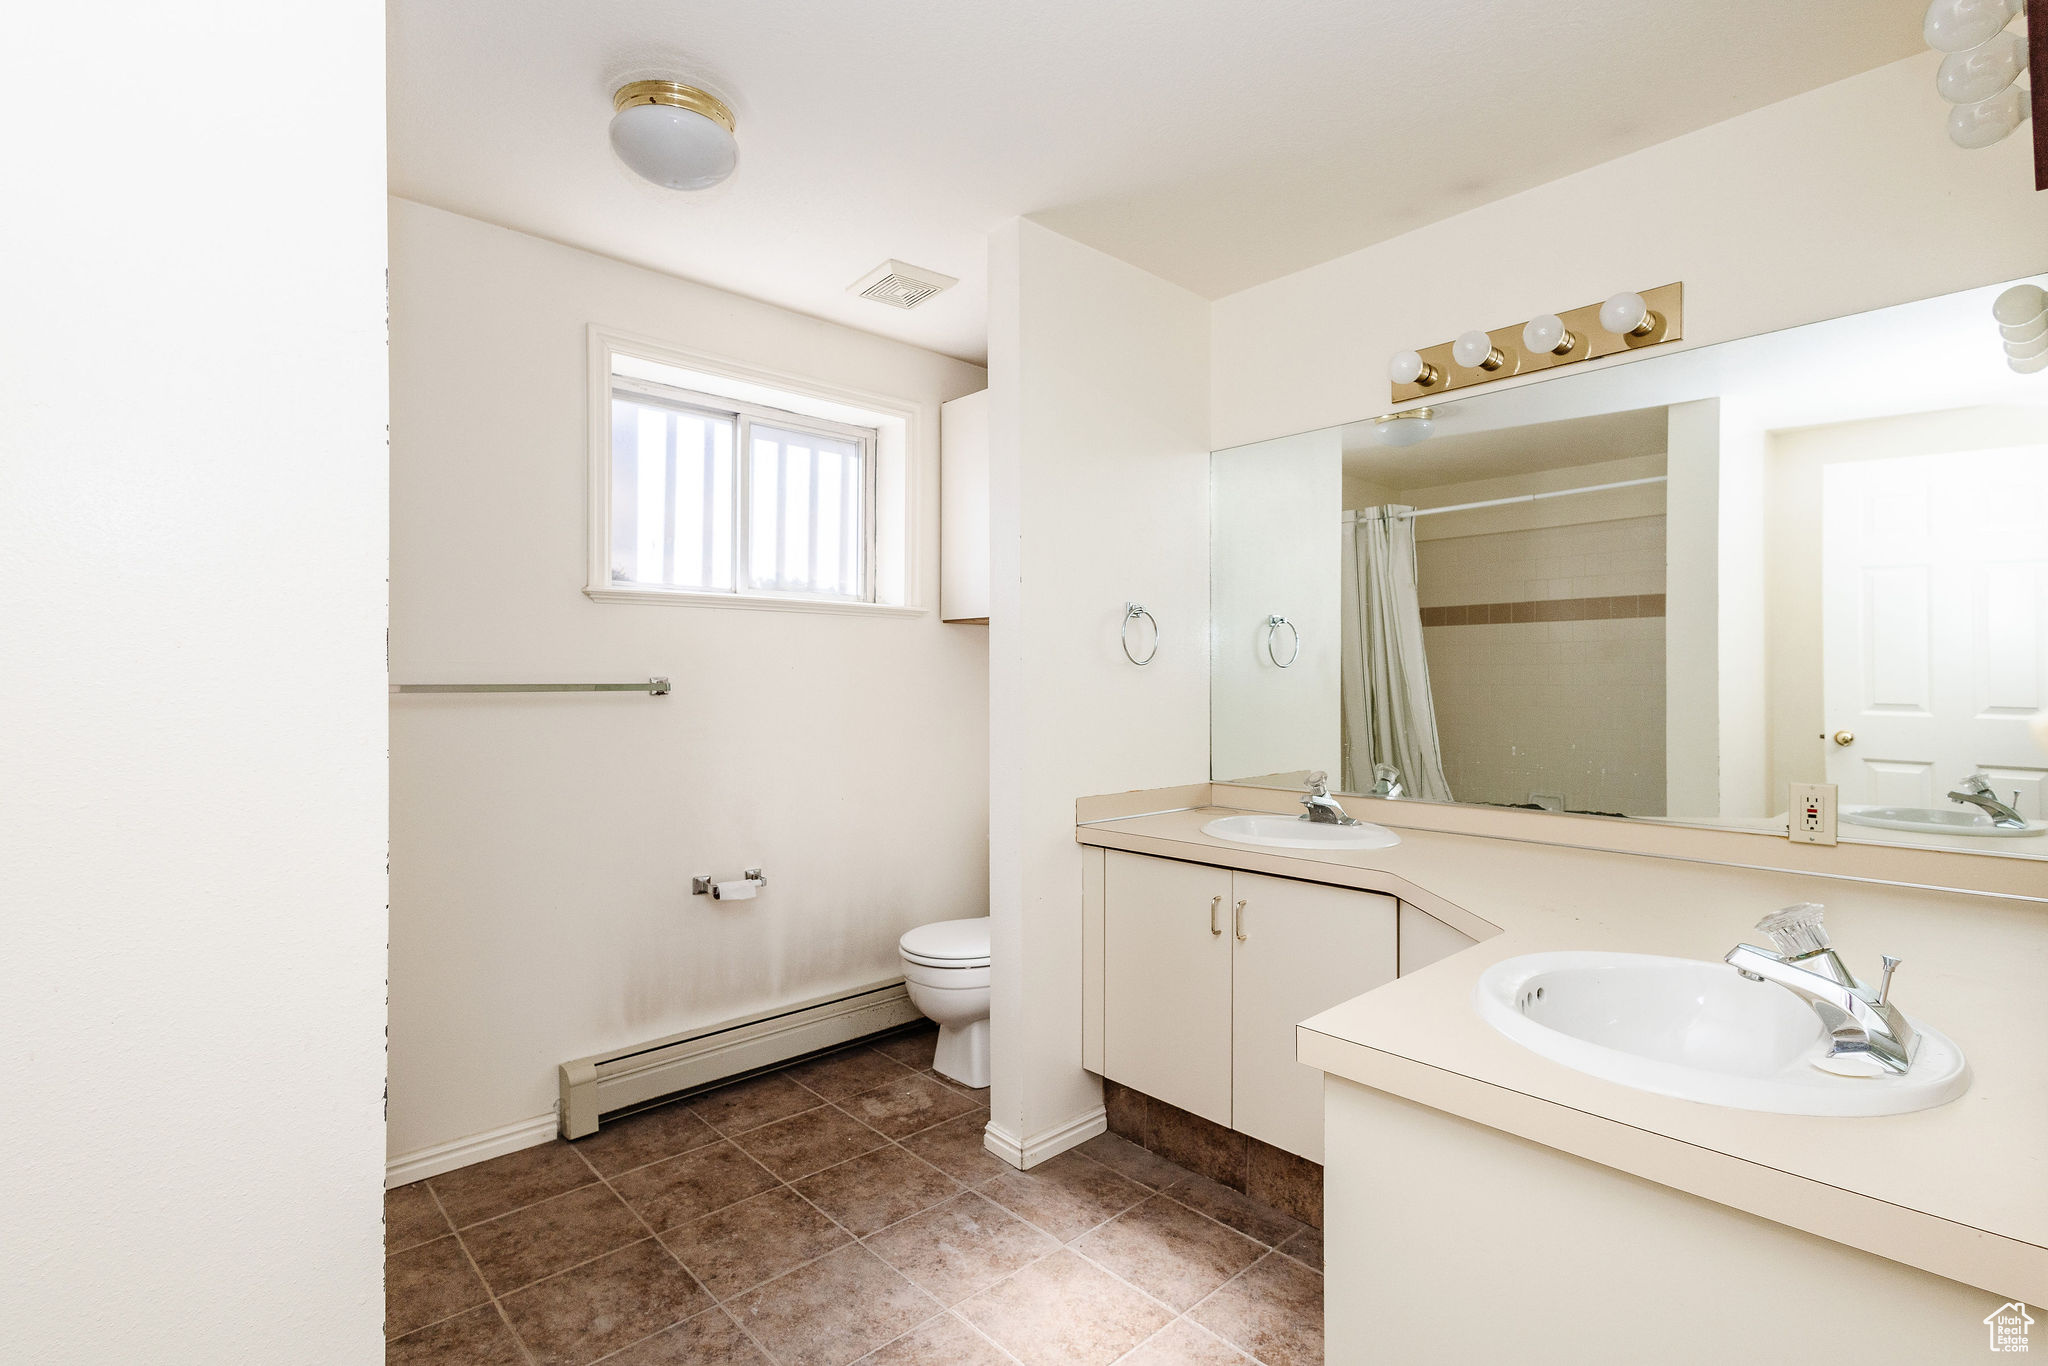 Bathroom featuring tile flooring, a baseboard heating unit, oversized vanity, double sink, and toilet